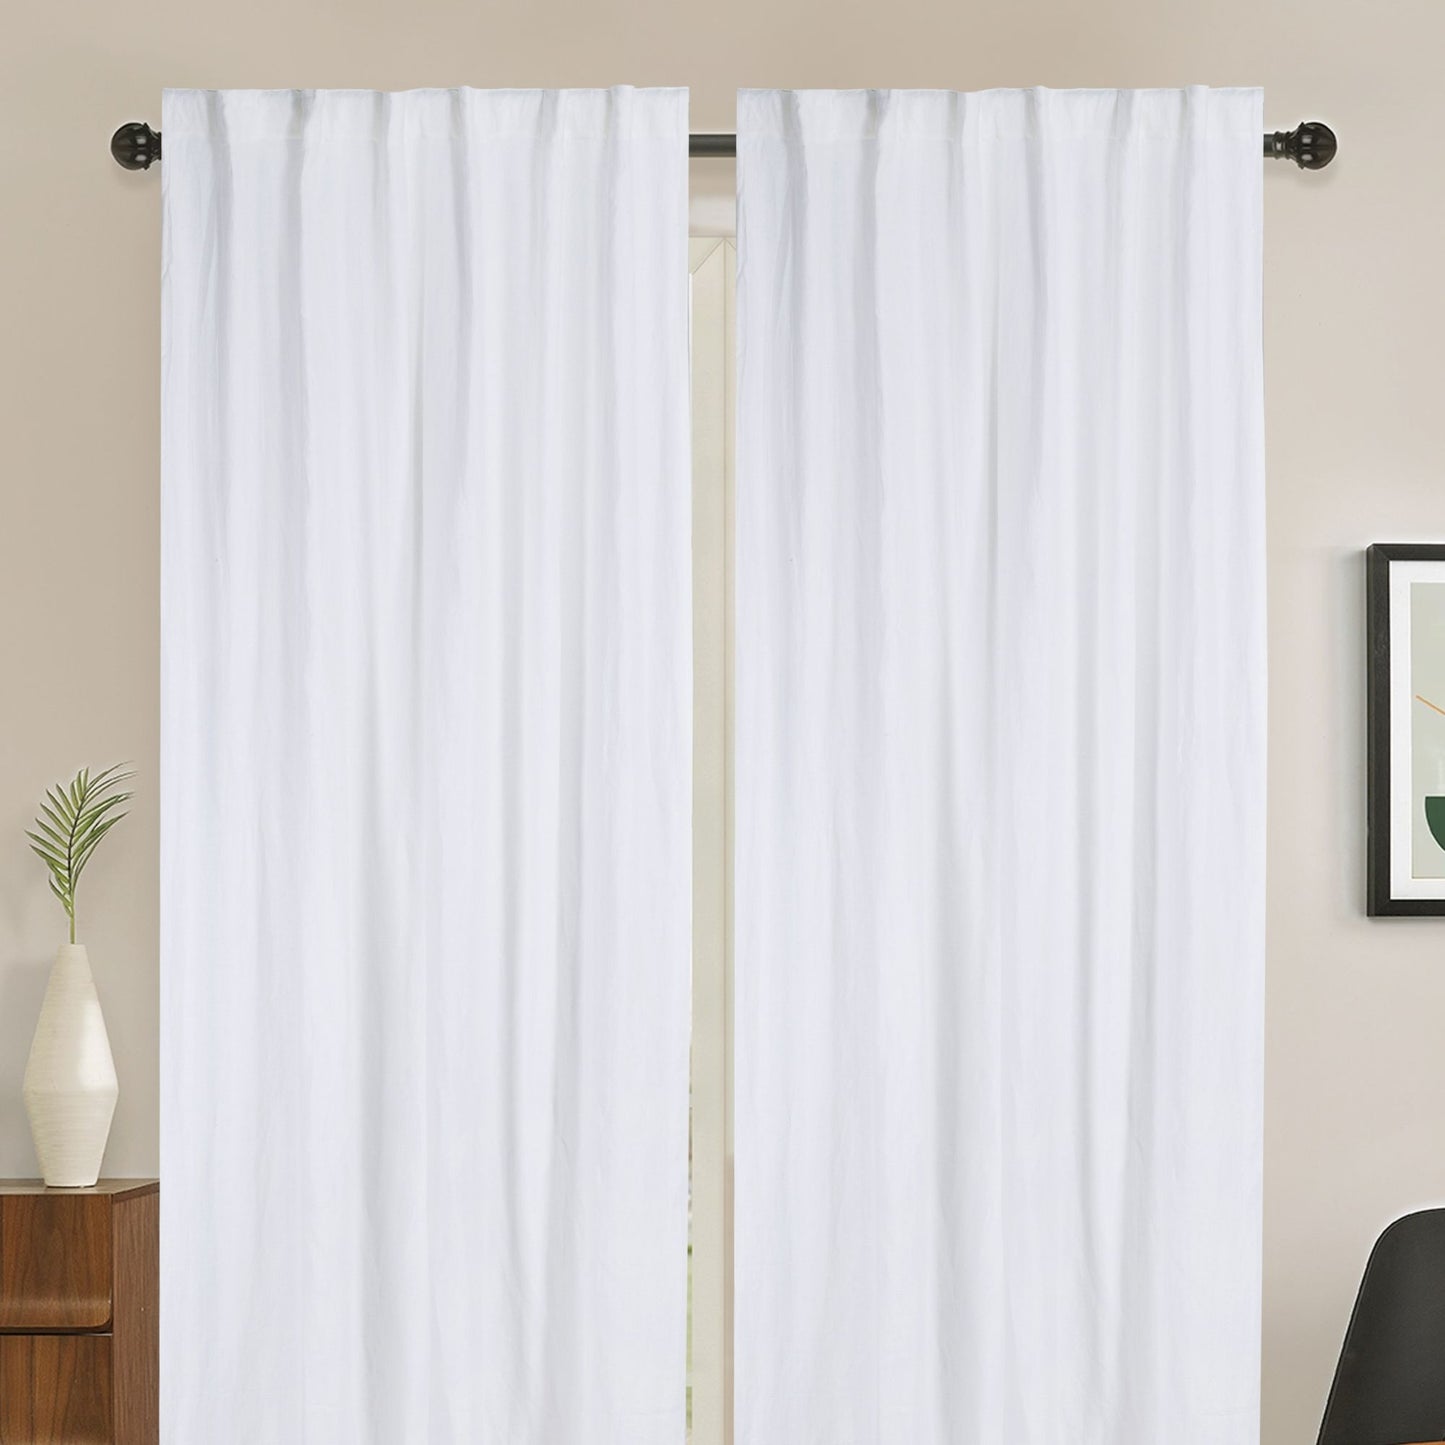 Newport Unlined Window Curtains for Bedroom, Linen Curtains for Living Room, 84 Inches Long Curtains for Living Room, Soft White